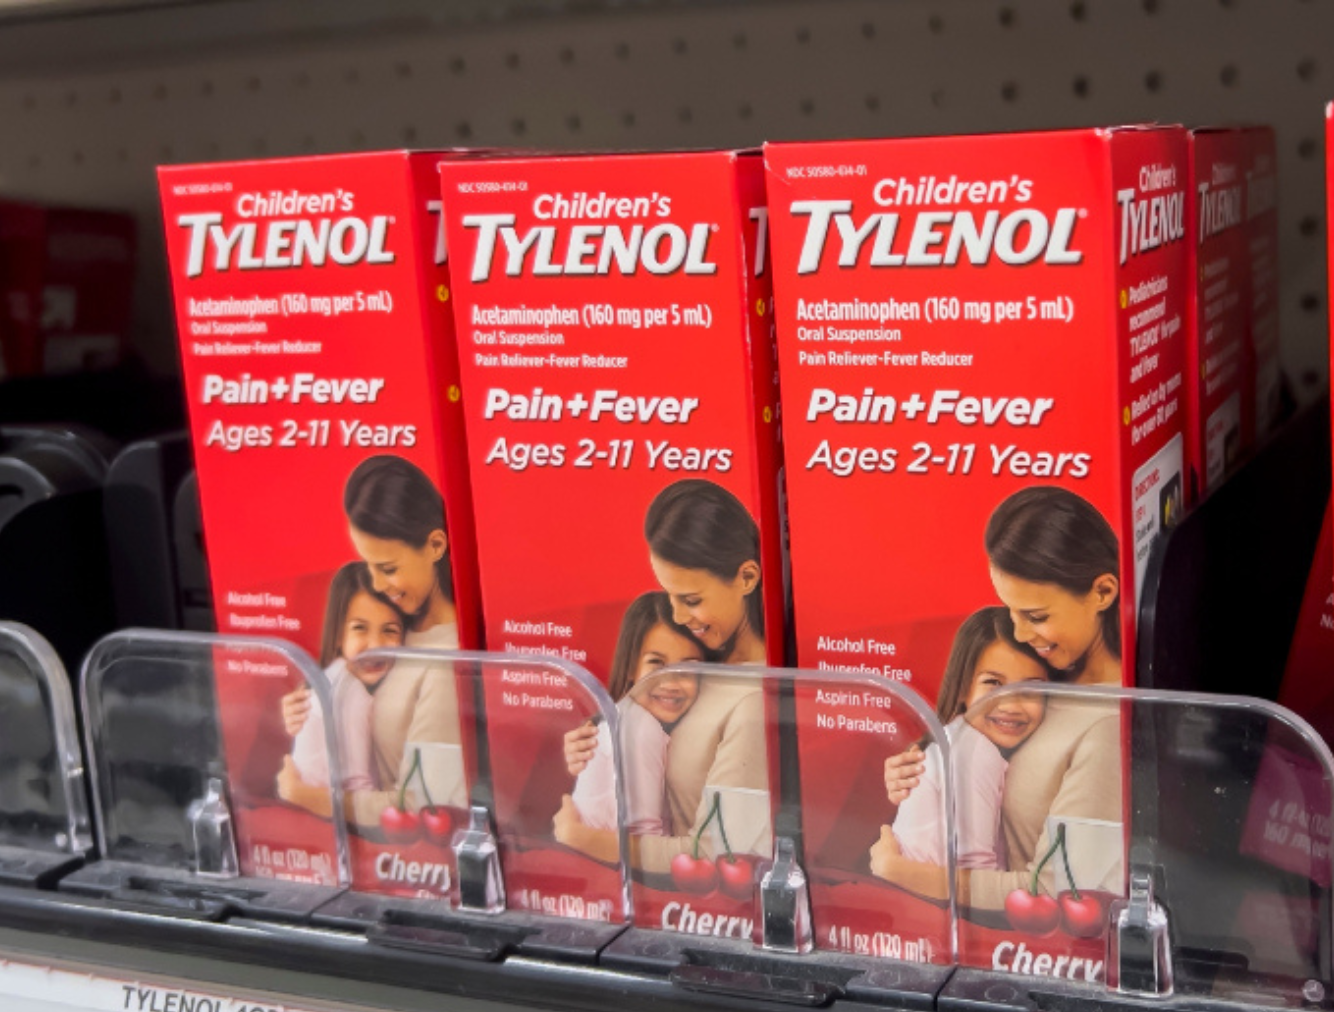 Imports of kids’ Tylenol differ from what Canadians are used to. Here’s what we know